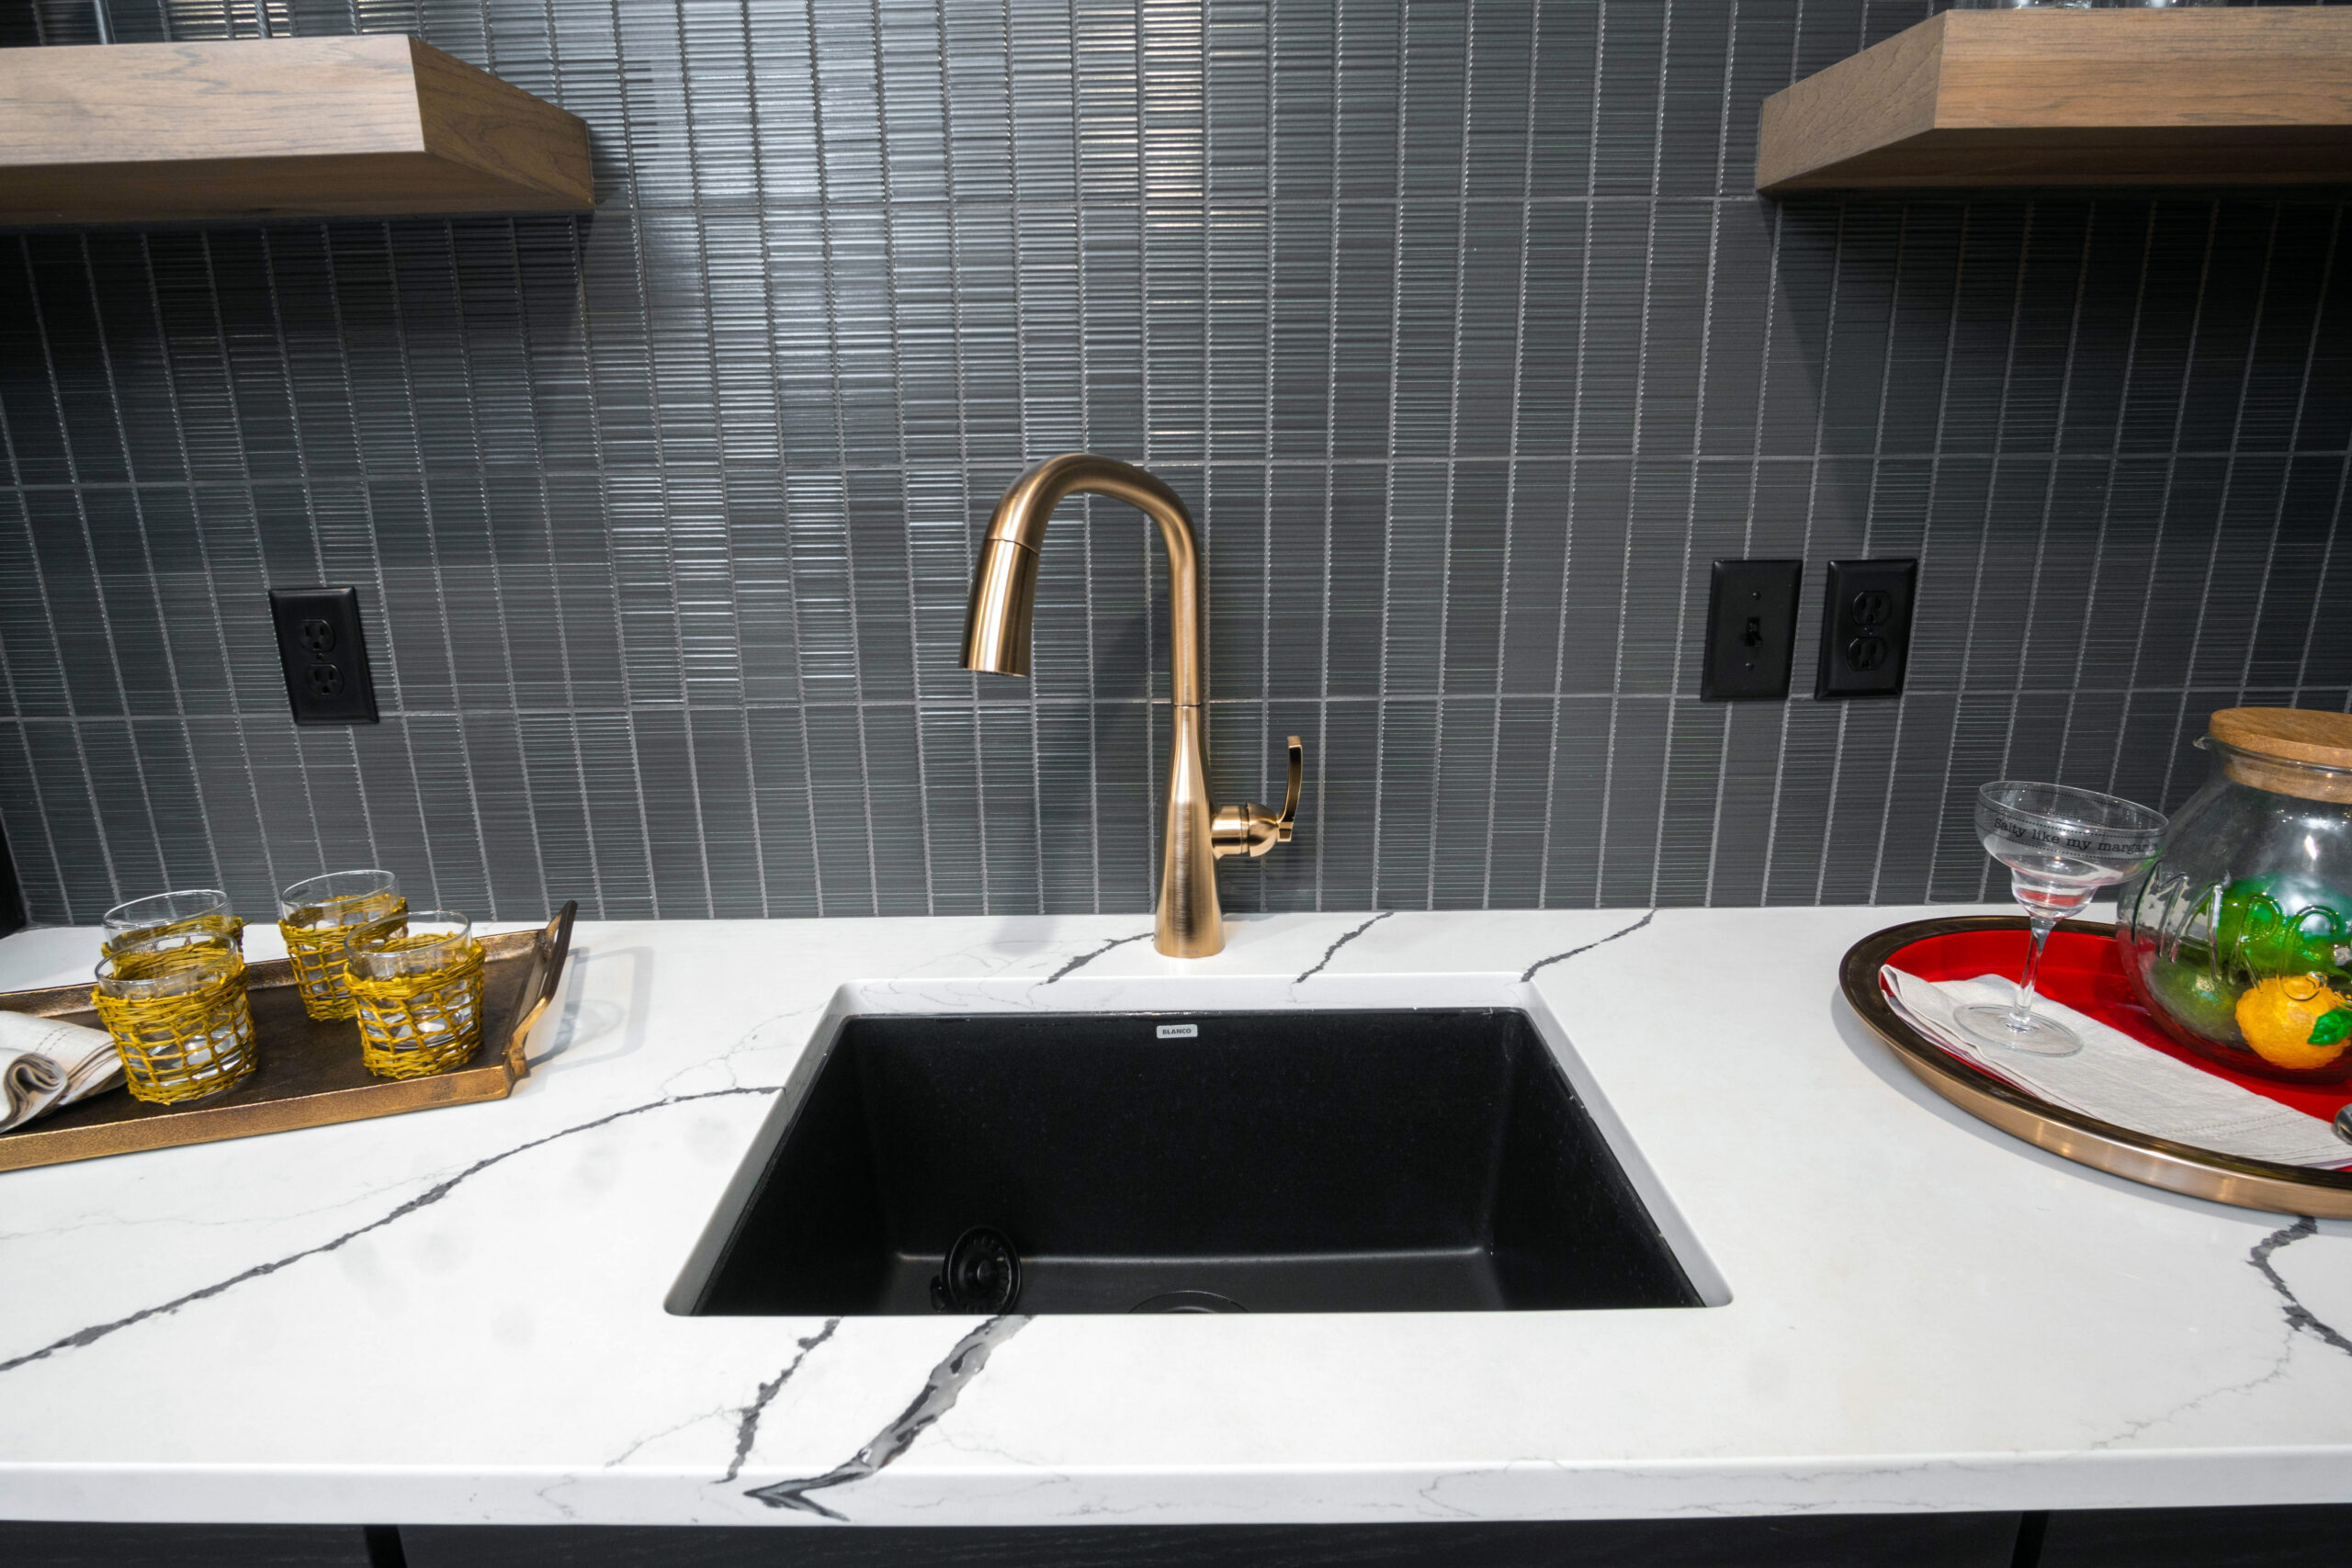 This kitchen features a black sink with a gold faucet surrounded by white countertop with black and gray veins. The backsplash features gray tiles.